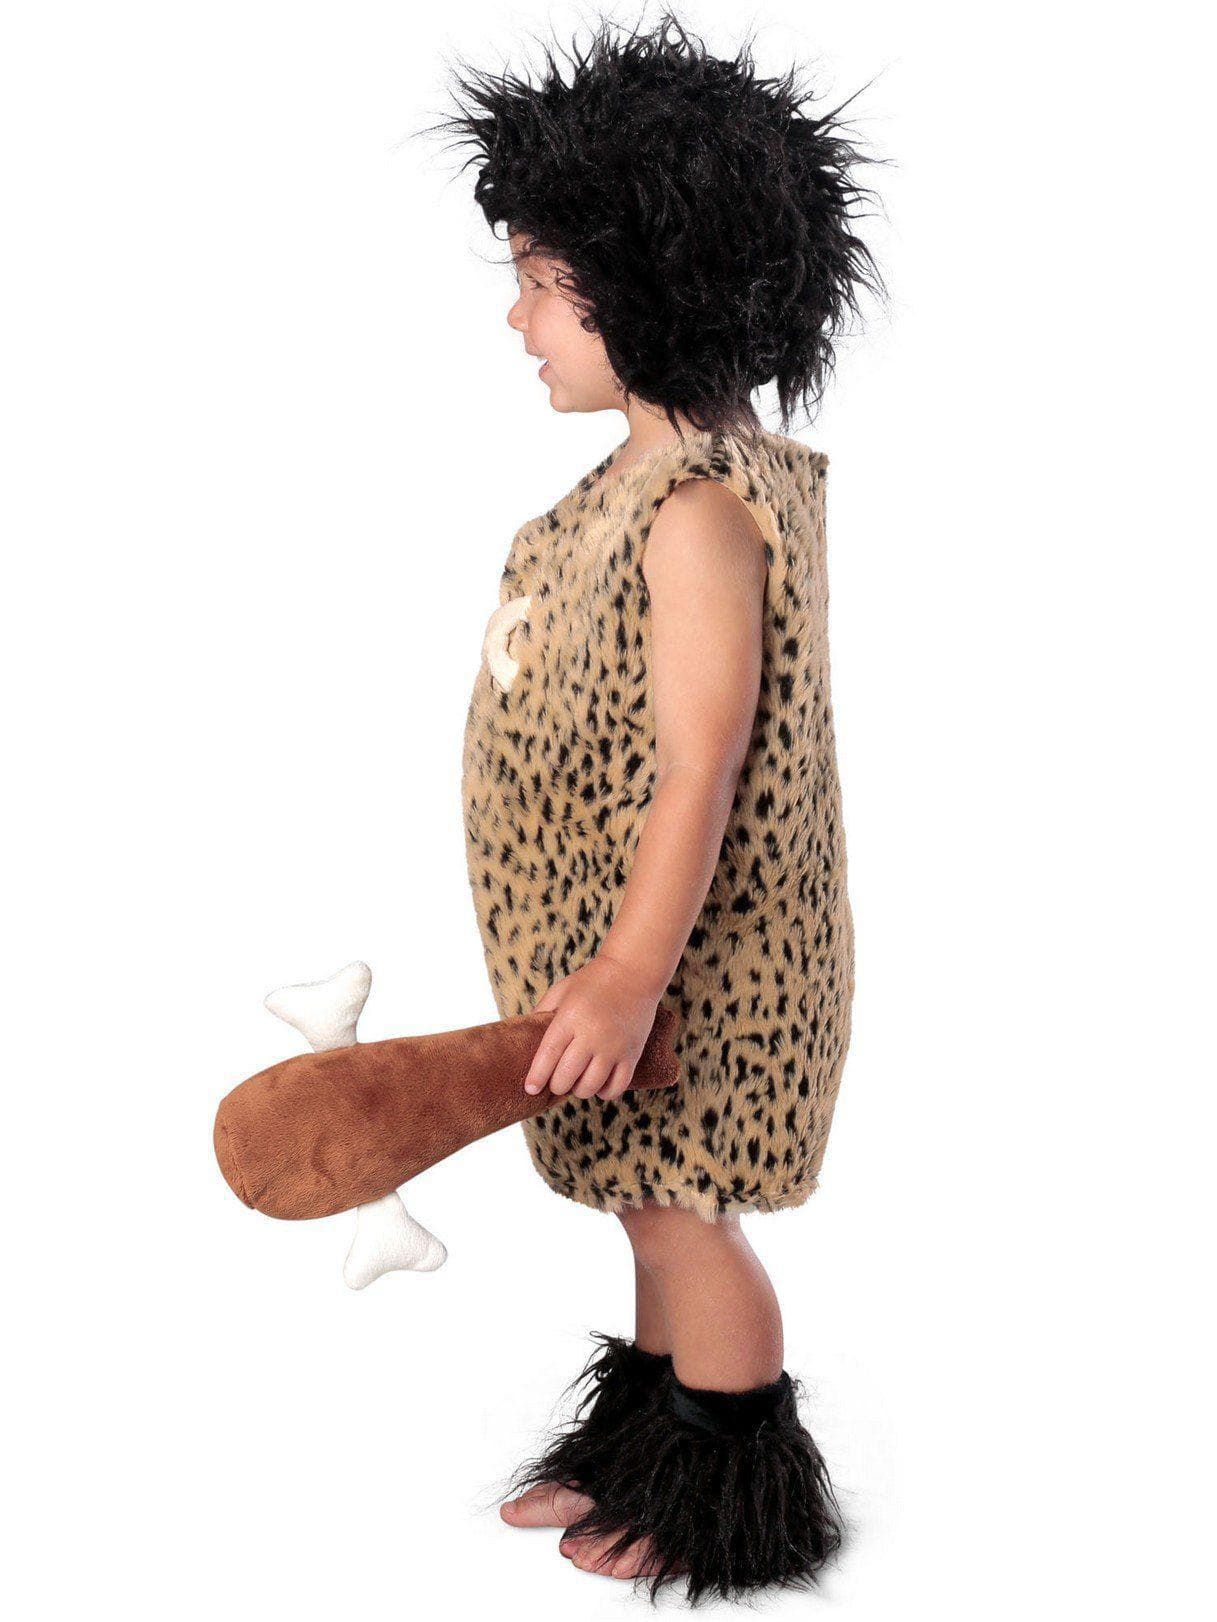 Baby/Toddler Cave baby Boy Costume - costumes.com